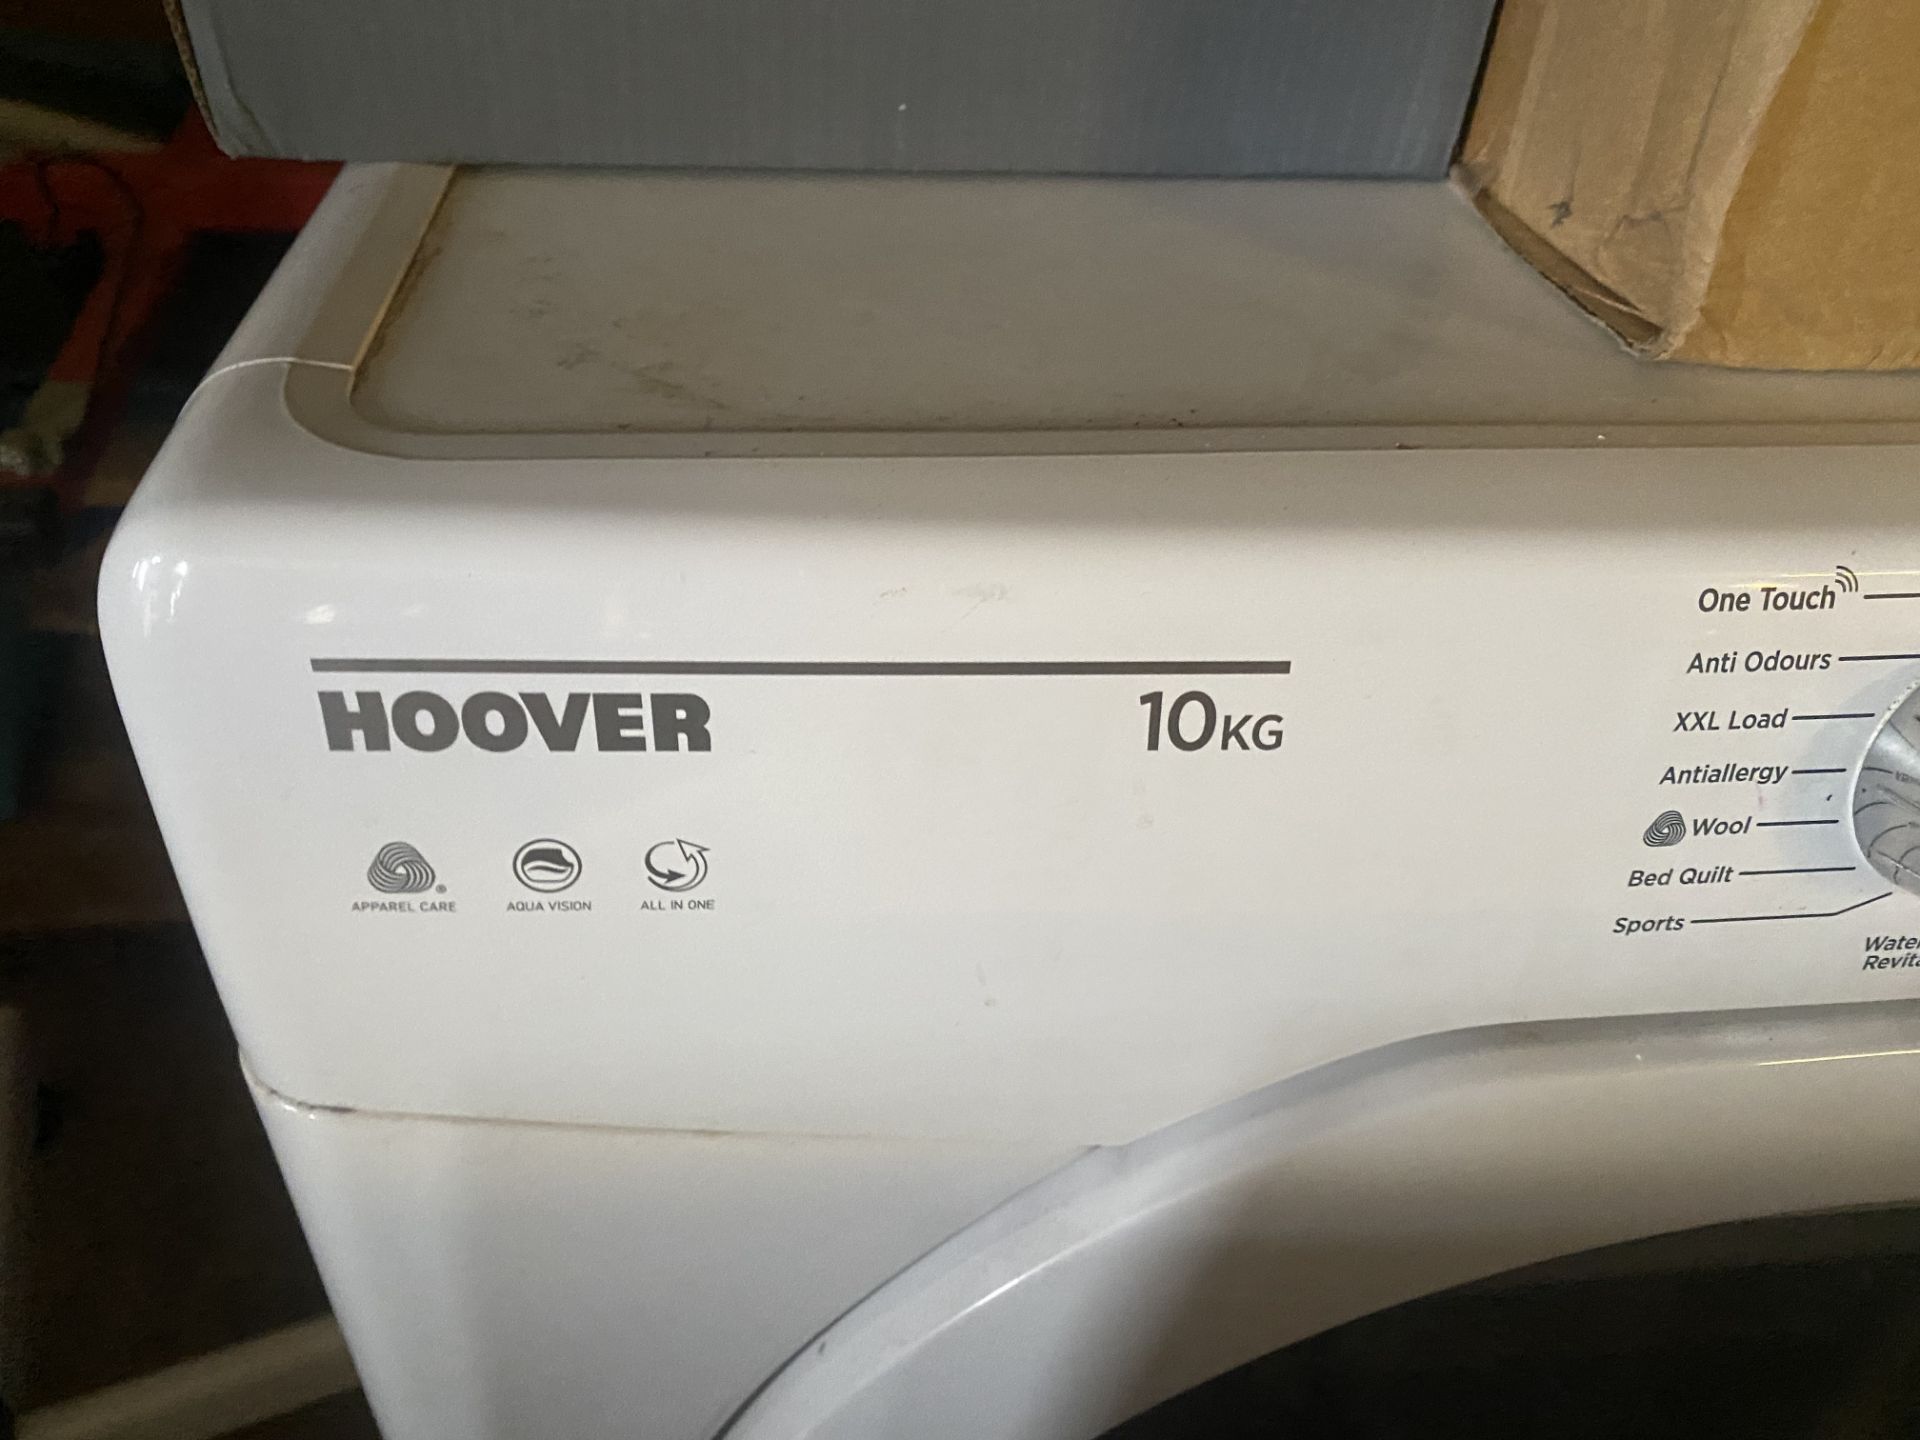 Hoover Link One Touch h10kg 1400spu washing machine and Hoover One Touch 10kg Dynamic Next tumble - Image 7 of 10